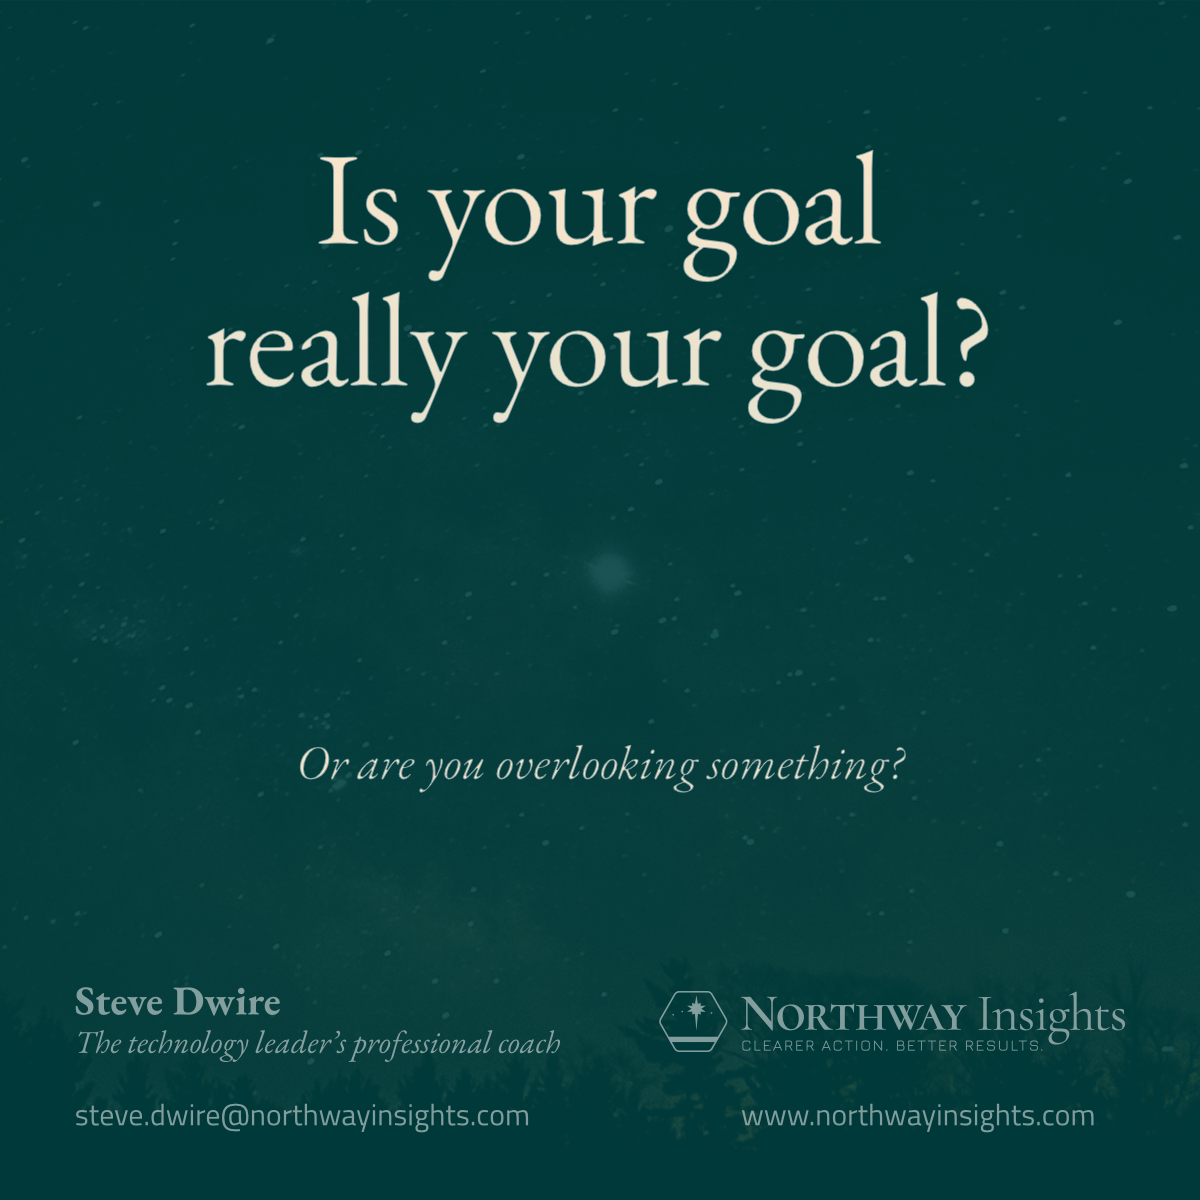 Is your goal really your goal? (Or are you overlooking something?)